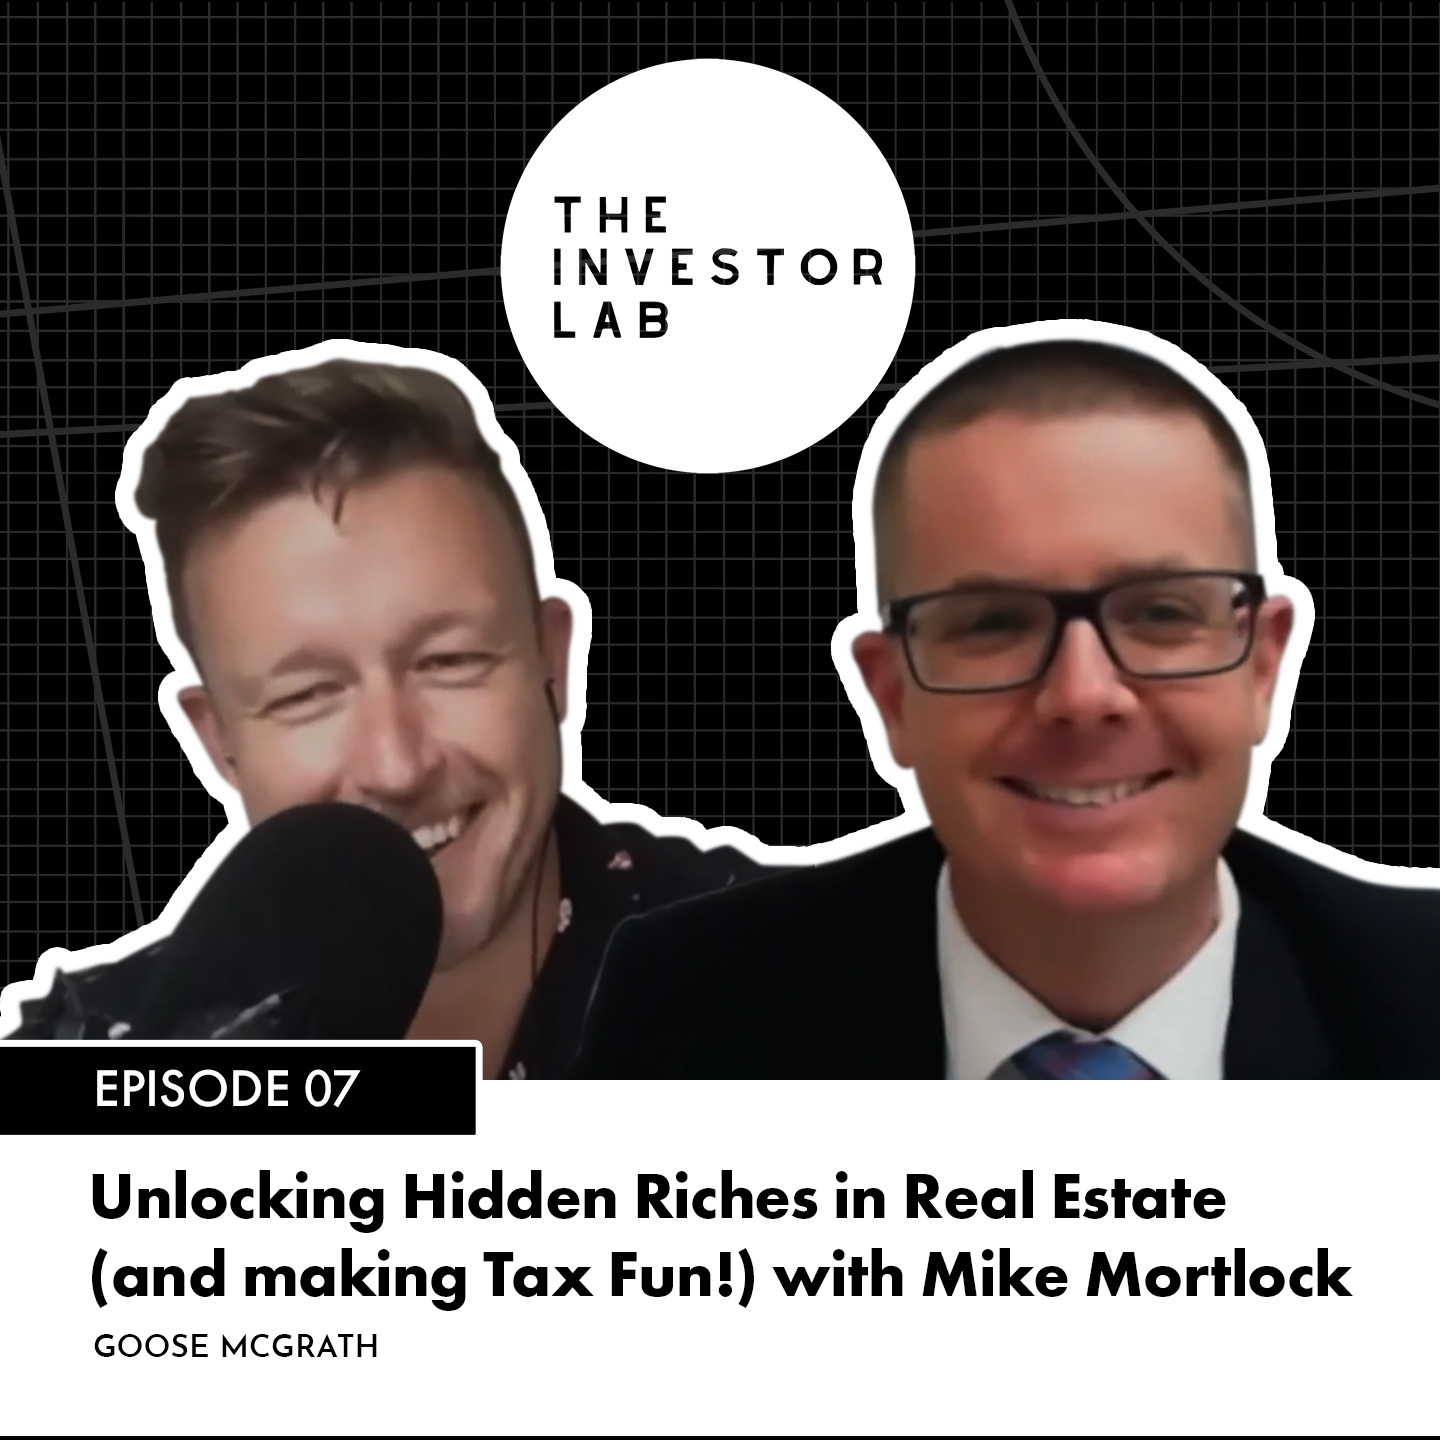 Unlocking The Hidden Riches In Real Estate (...And Making Tax Fun!) with Mike Mortlock